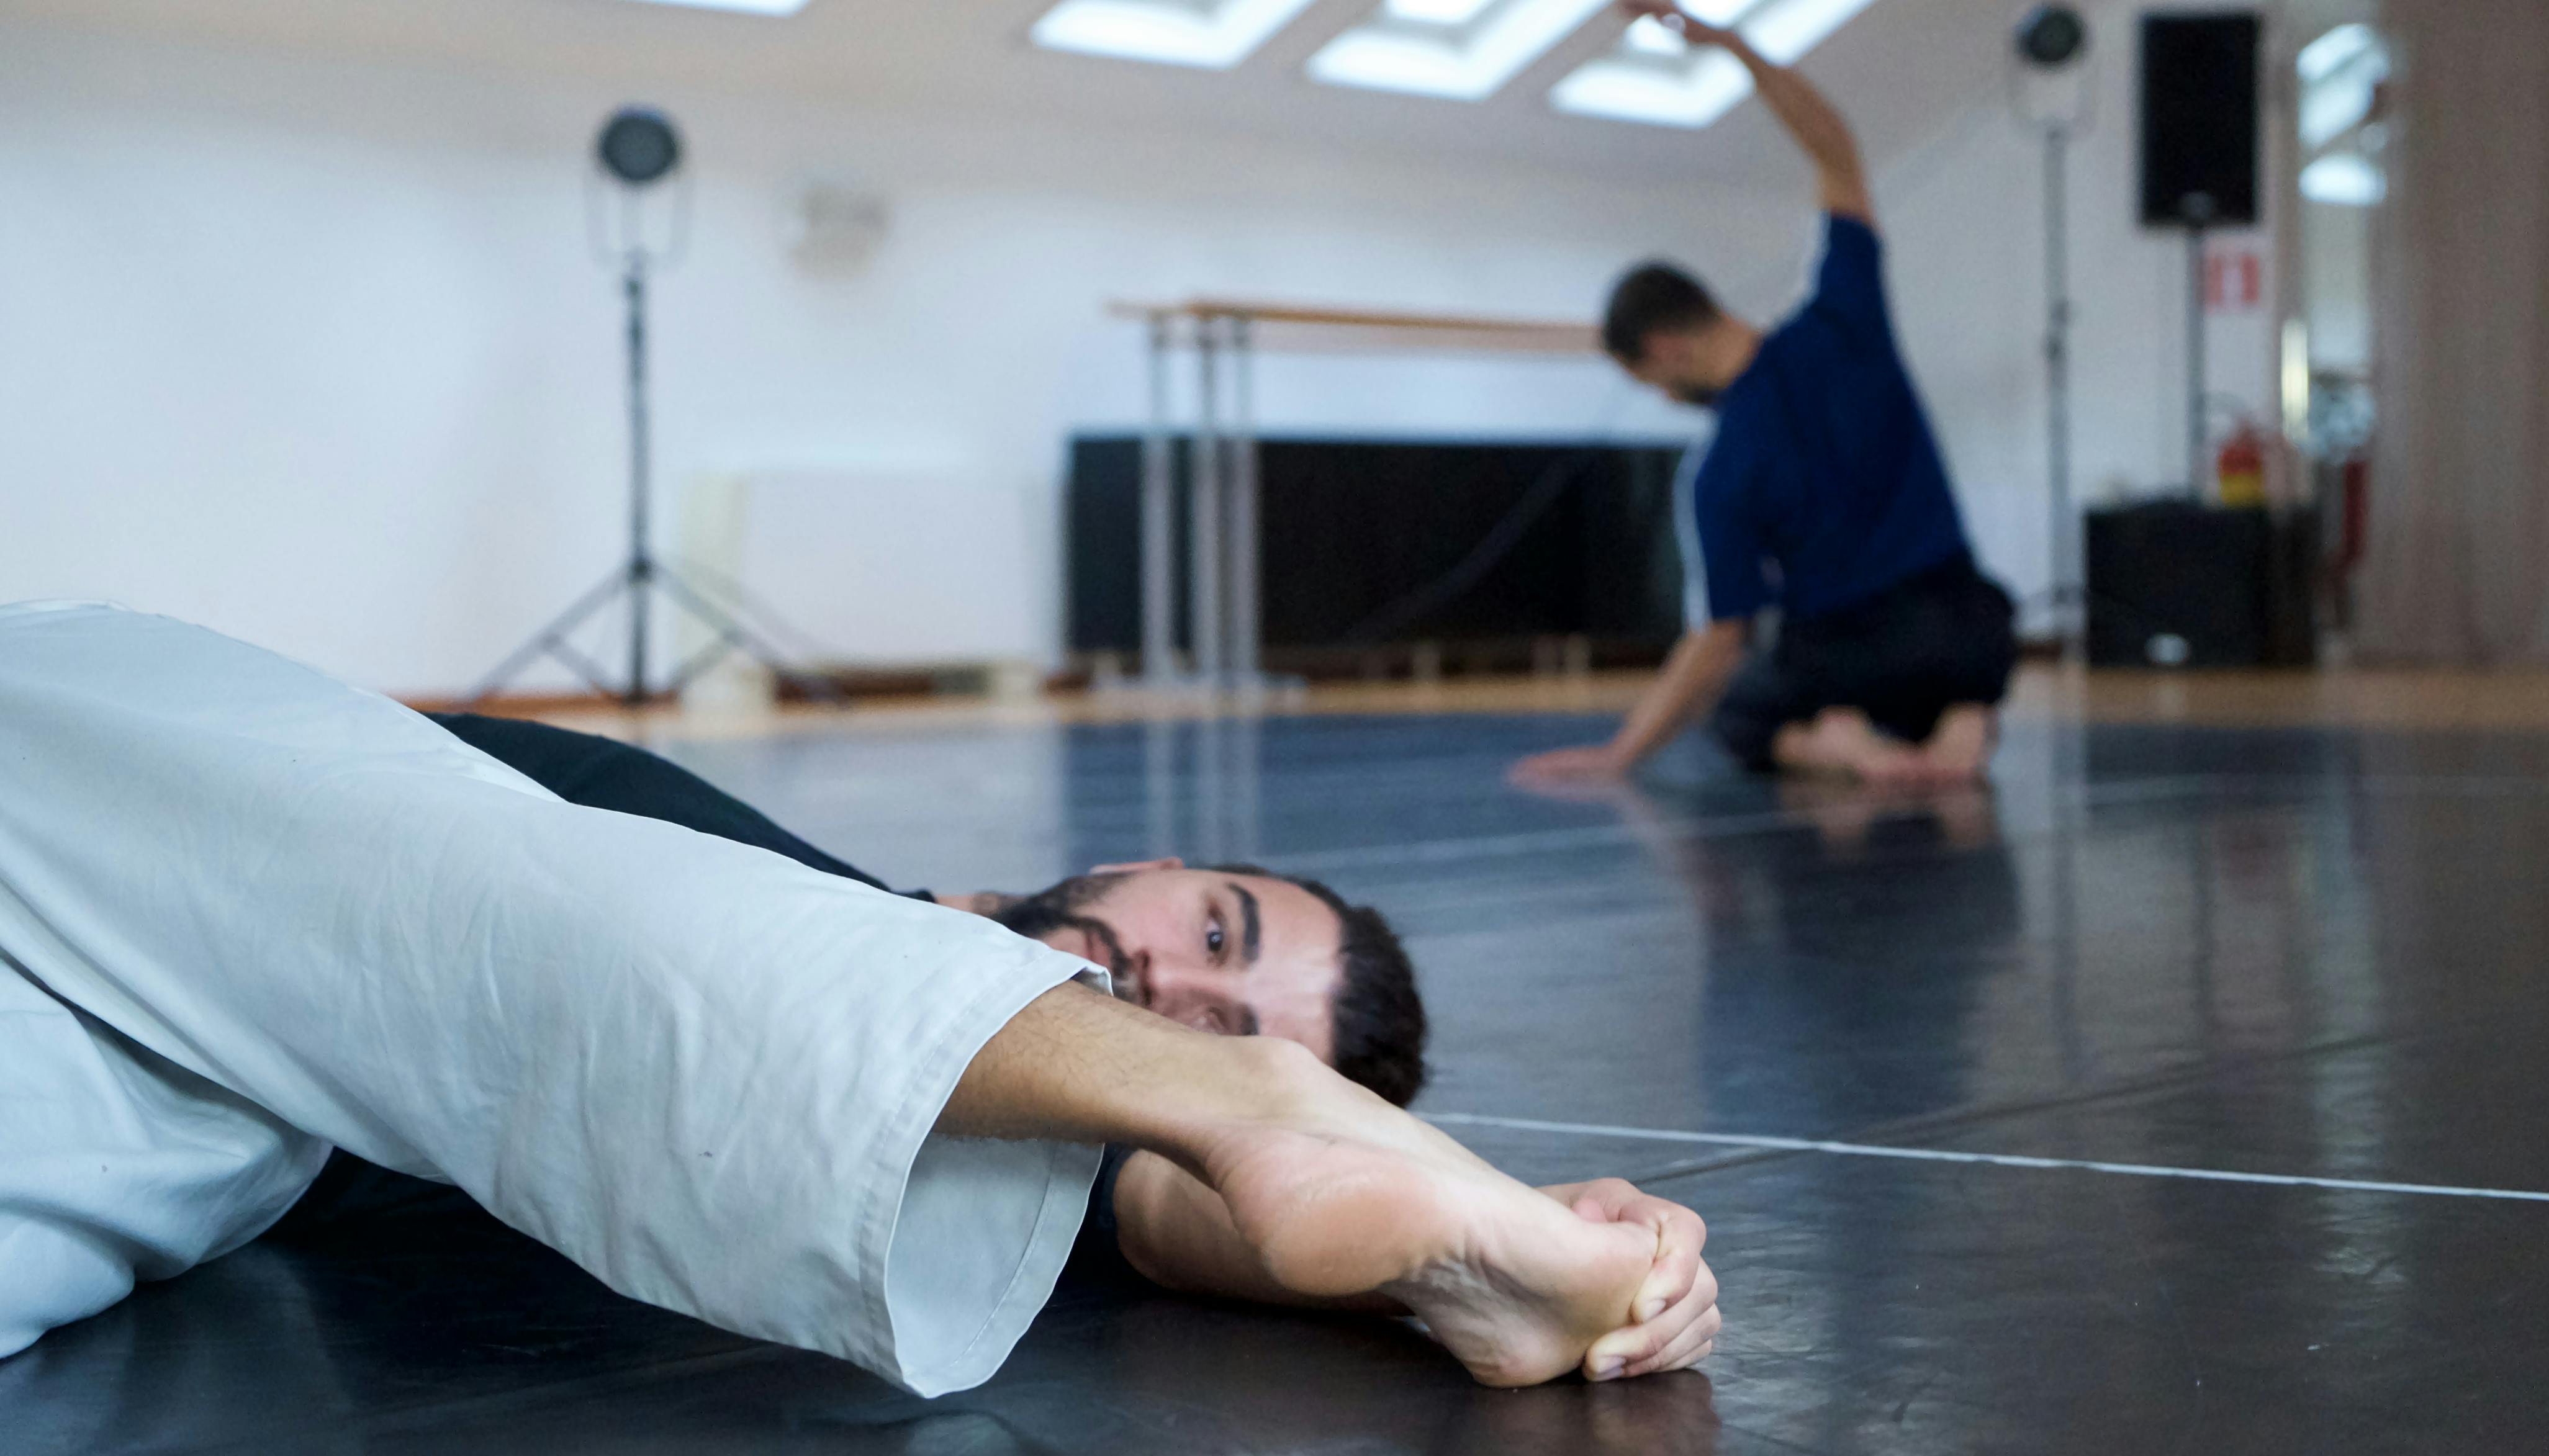 The two choreographers warm up before rehearsal: one of them is lying on the floor, the other on his knees stretching his back.